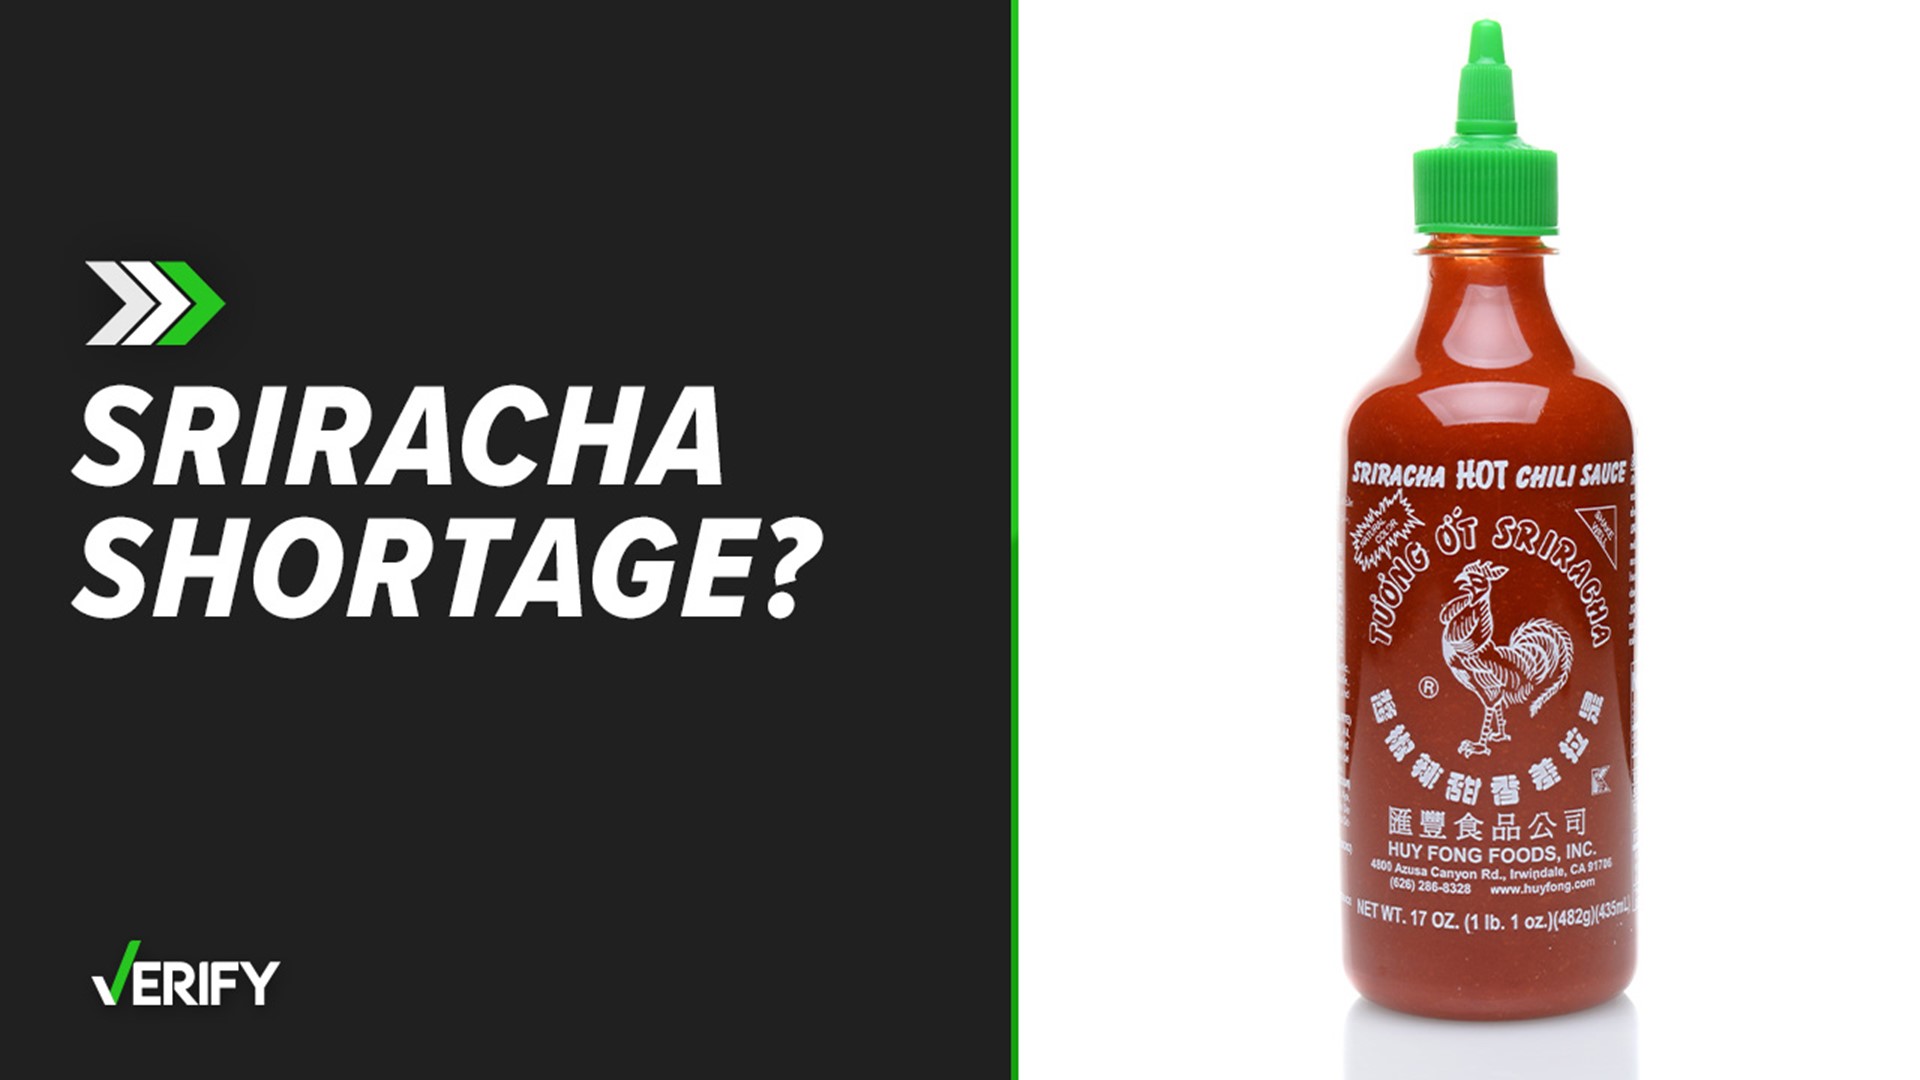 Sriracha hot chili sauce is still in short supply nationwide amid a prolonged shortage of chili peppers.